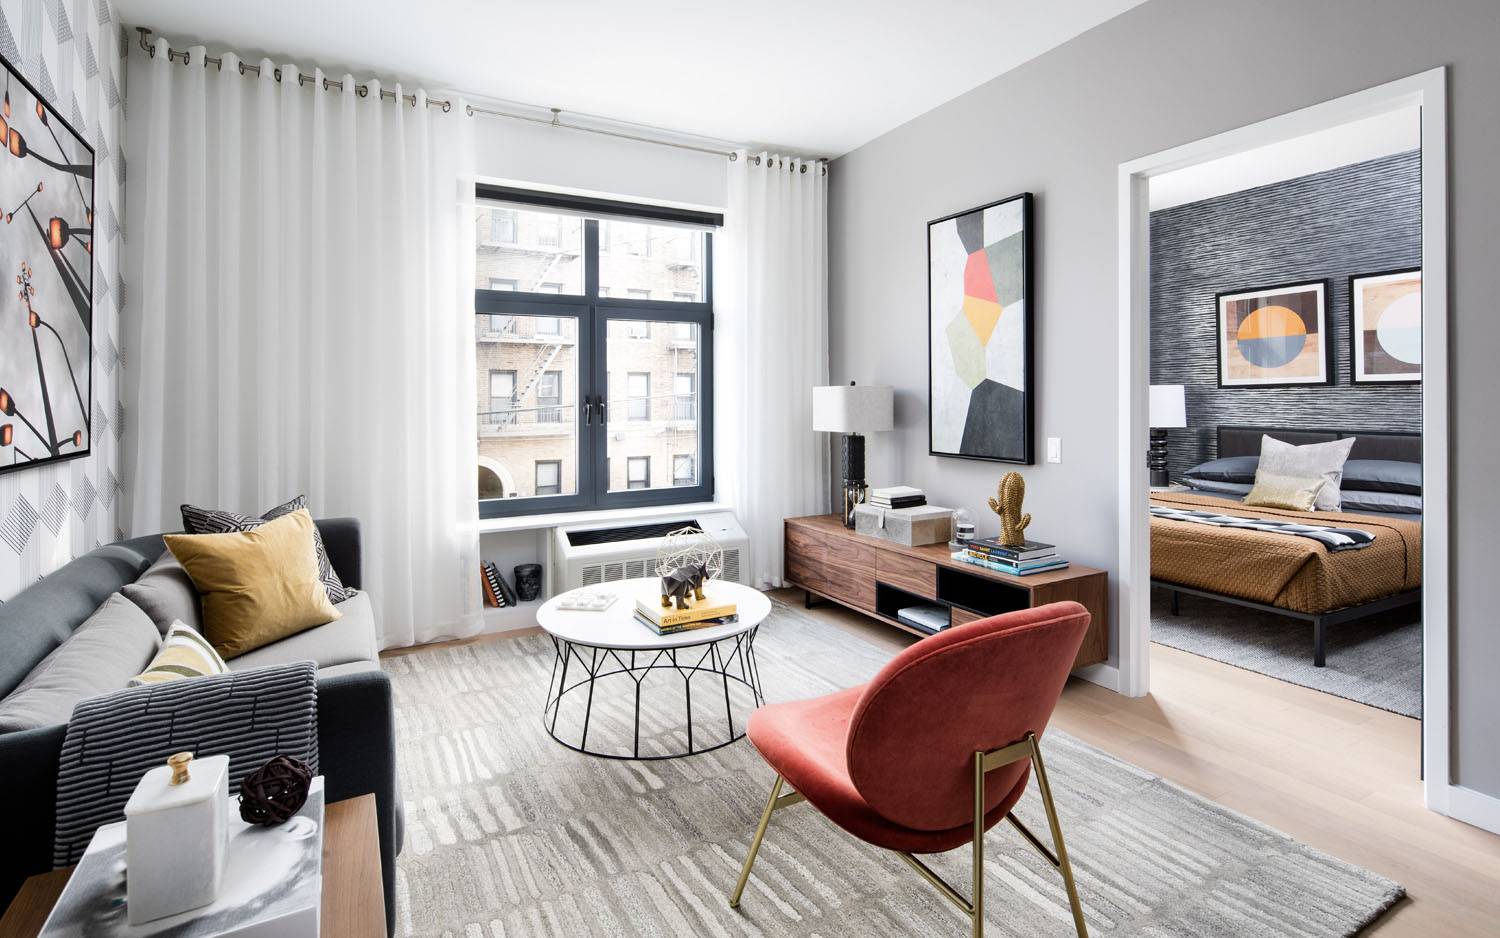 Vintage sensibilities meet contemporary design at Astor Broadway, the new residential development bringing a fresh perspective to ever vibrant Astoria.